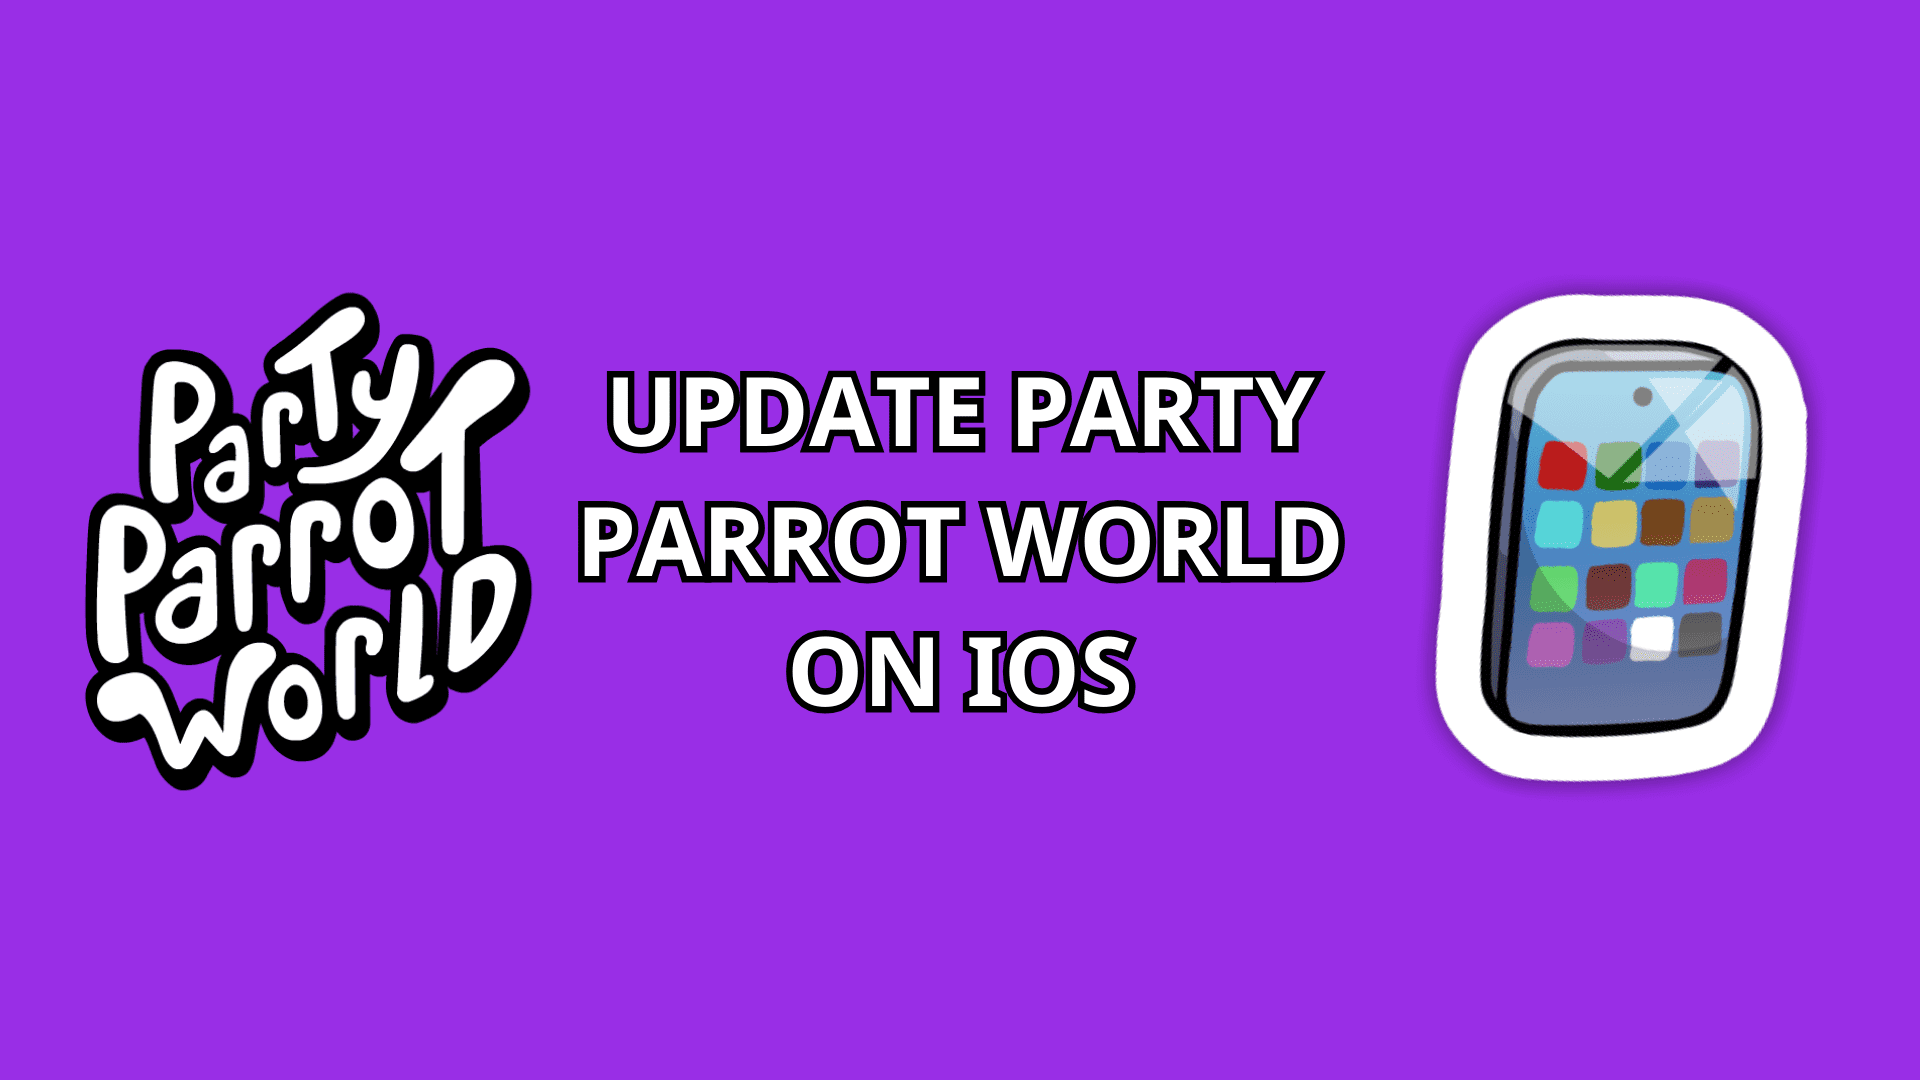 Update Party Parrot World on iOS text with Party Parrot World logo and silver smartphone icon